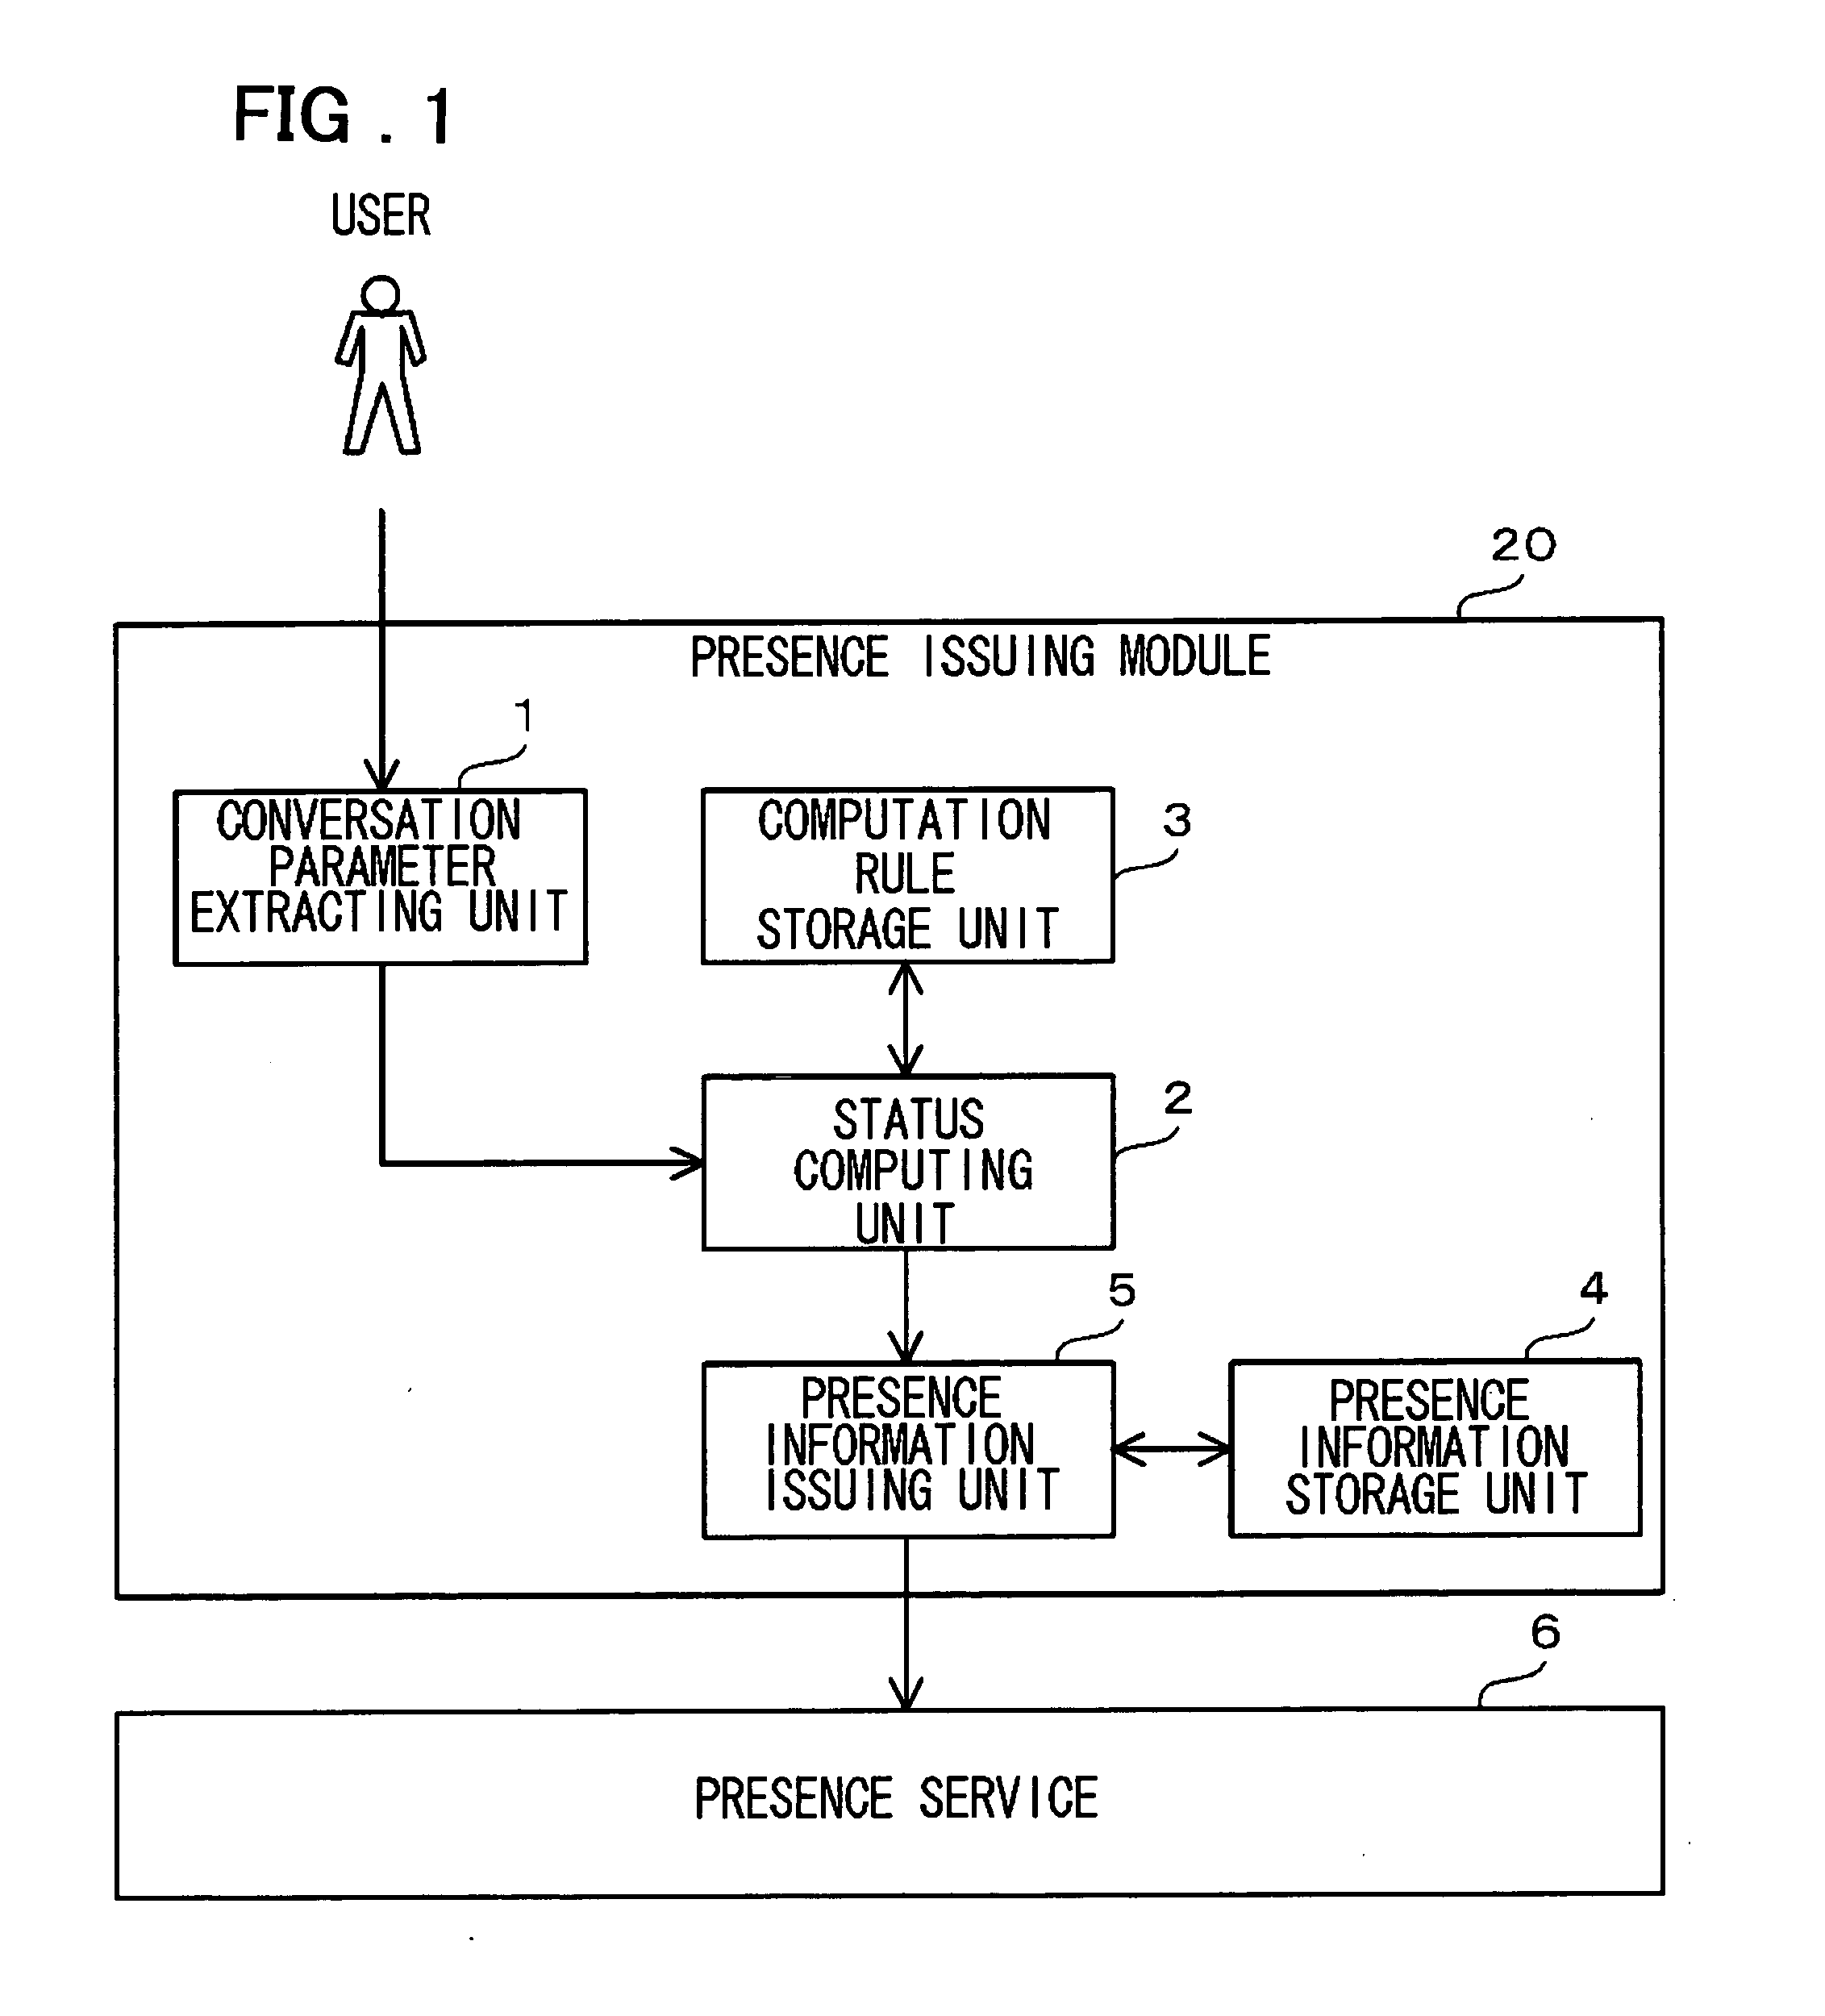 Apparatus, system and program for issuing presence information